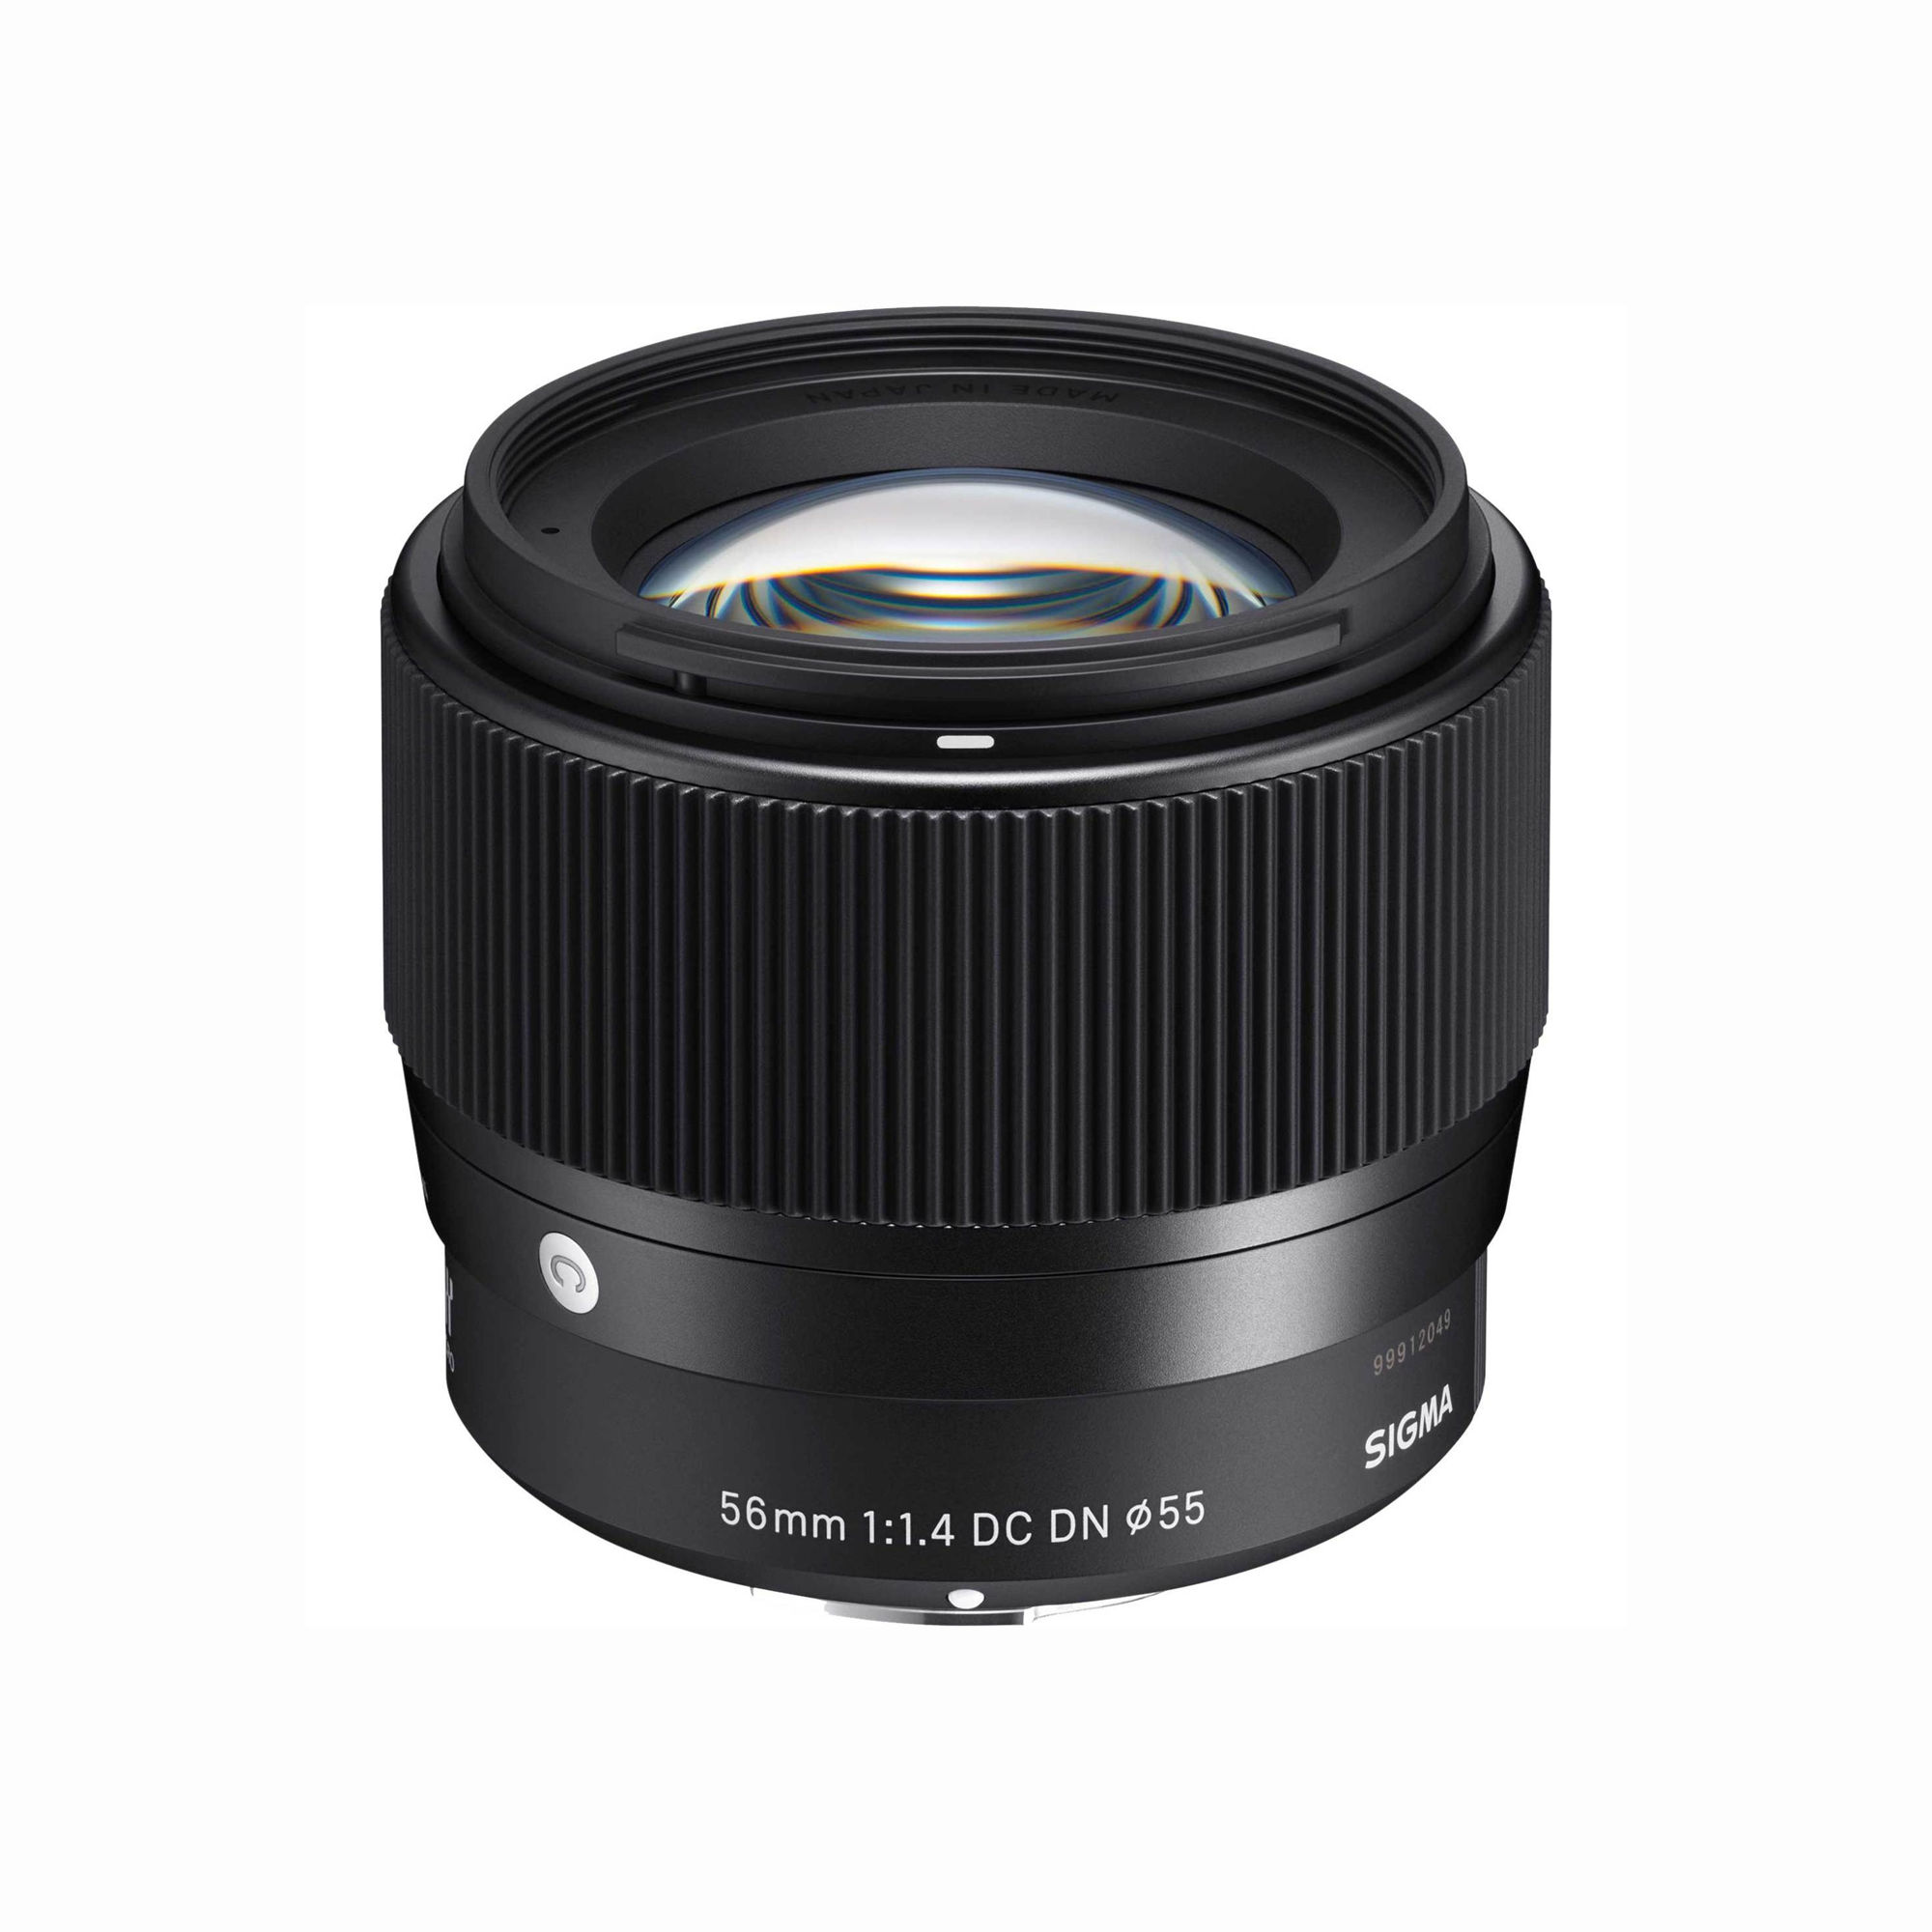 Sigma 56mm F1.4 DC DN HSM Contemporary Lens for L-mount